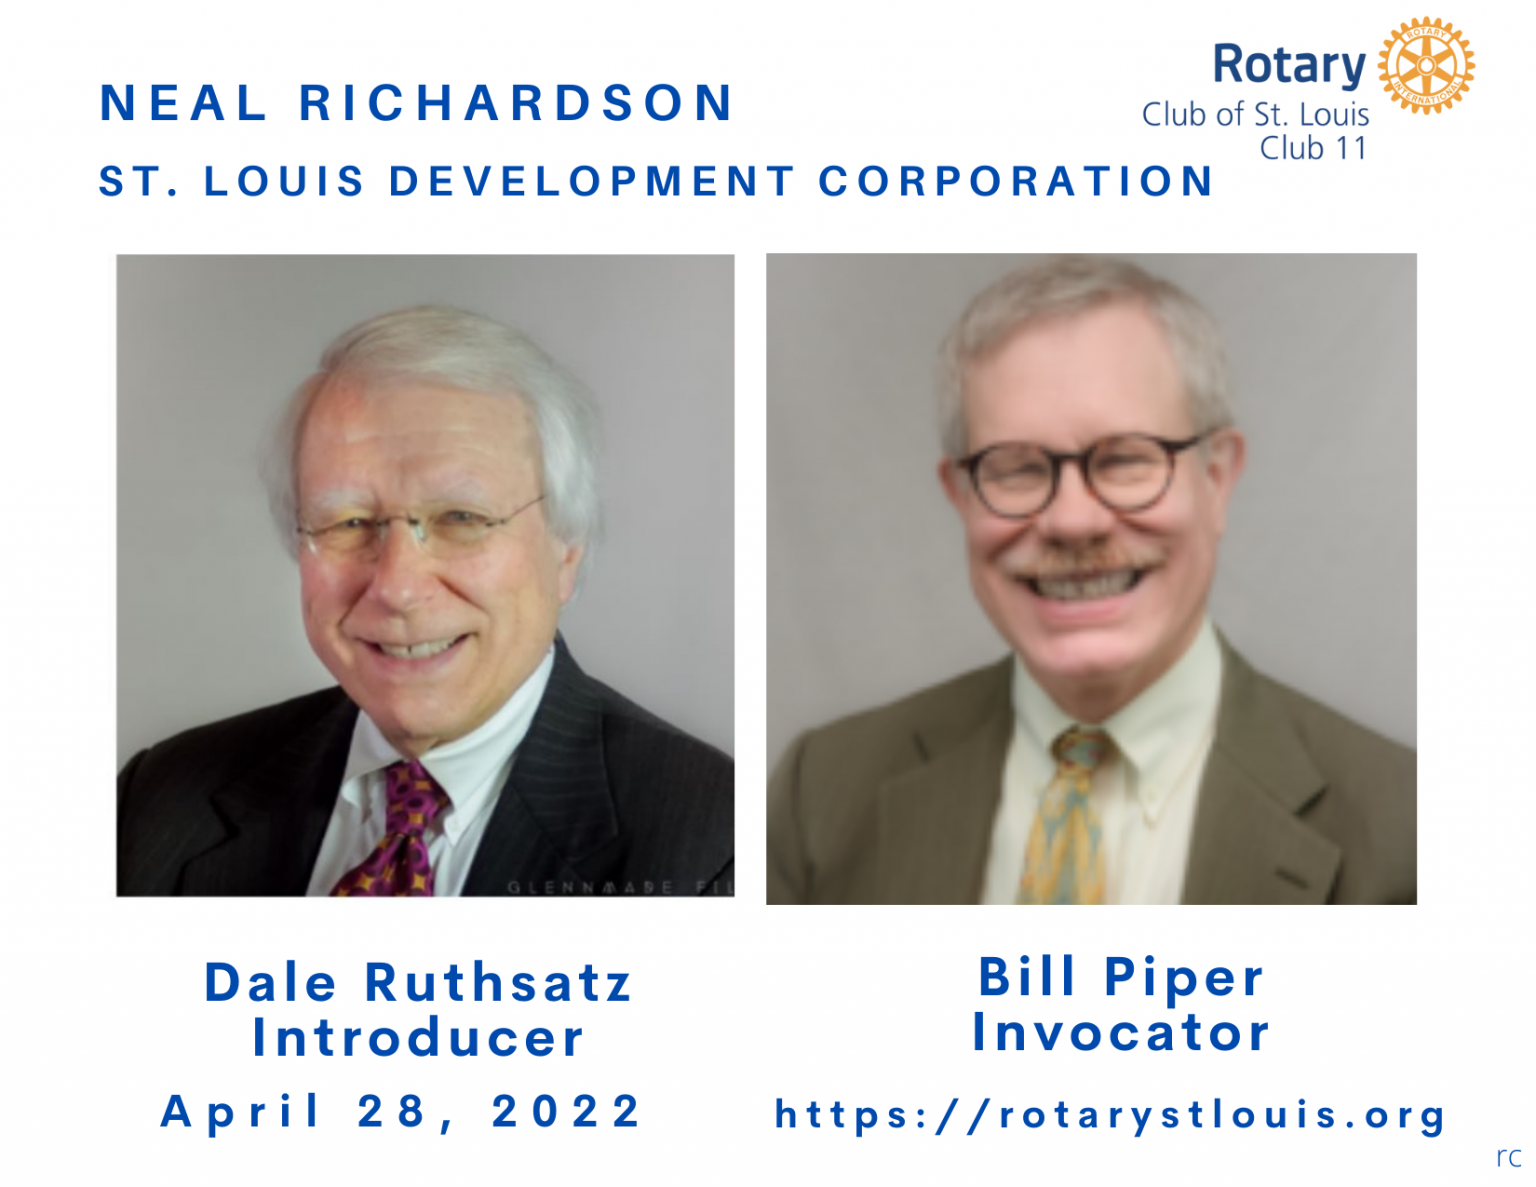 Dale Ruthsatz, Introducer and Bill Piper, Invocator at St. Louis Rotary 4-28-22